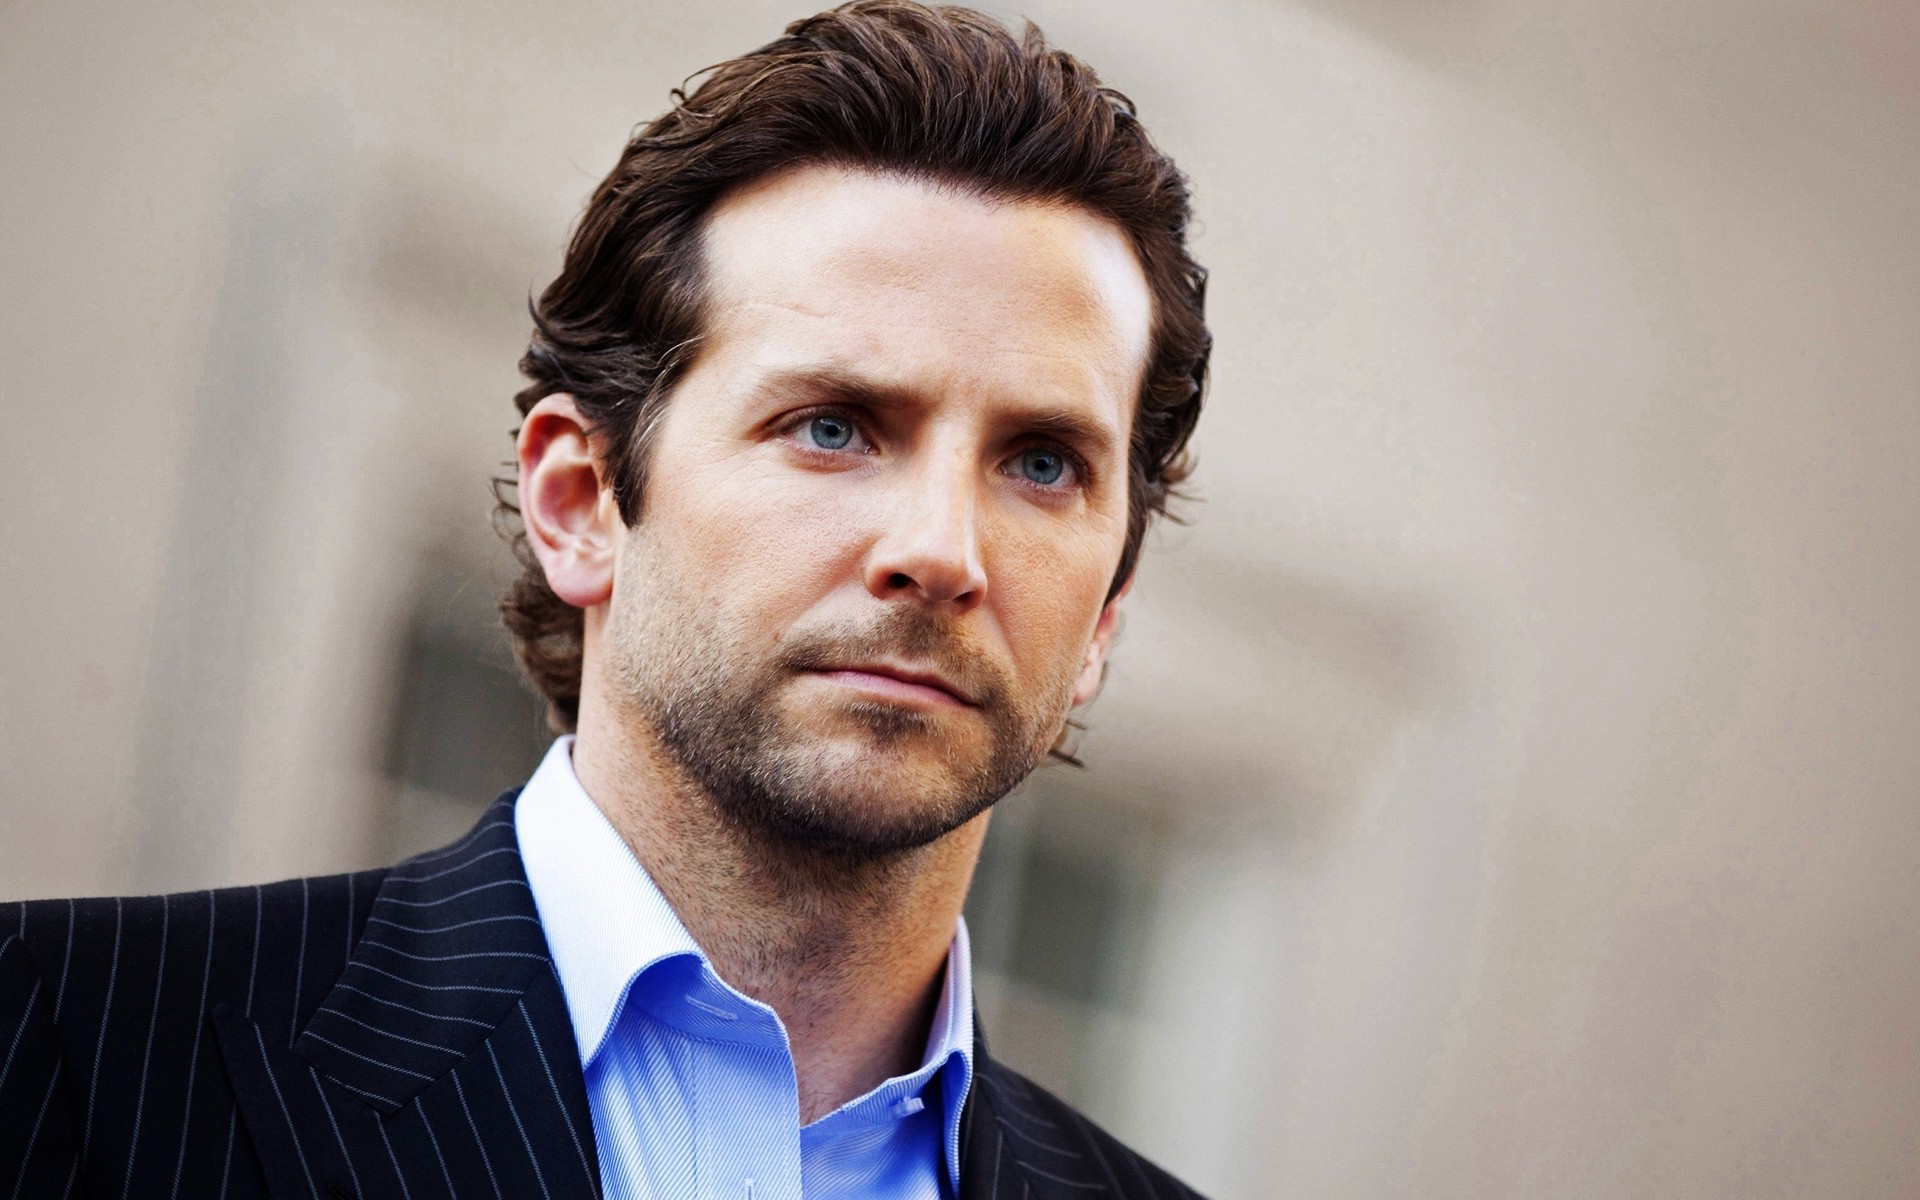 Bradley Cooper Wallpapers High Resolution and Quality Download 1920x1200